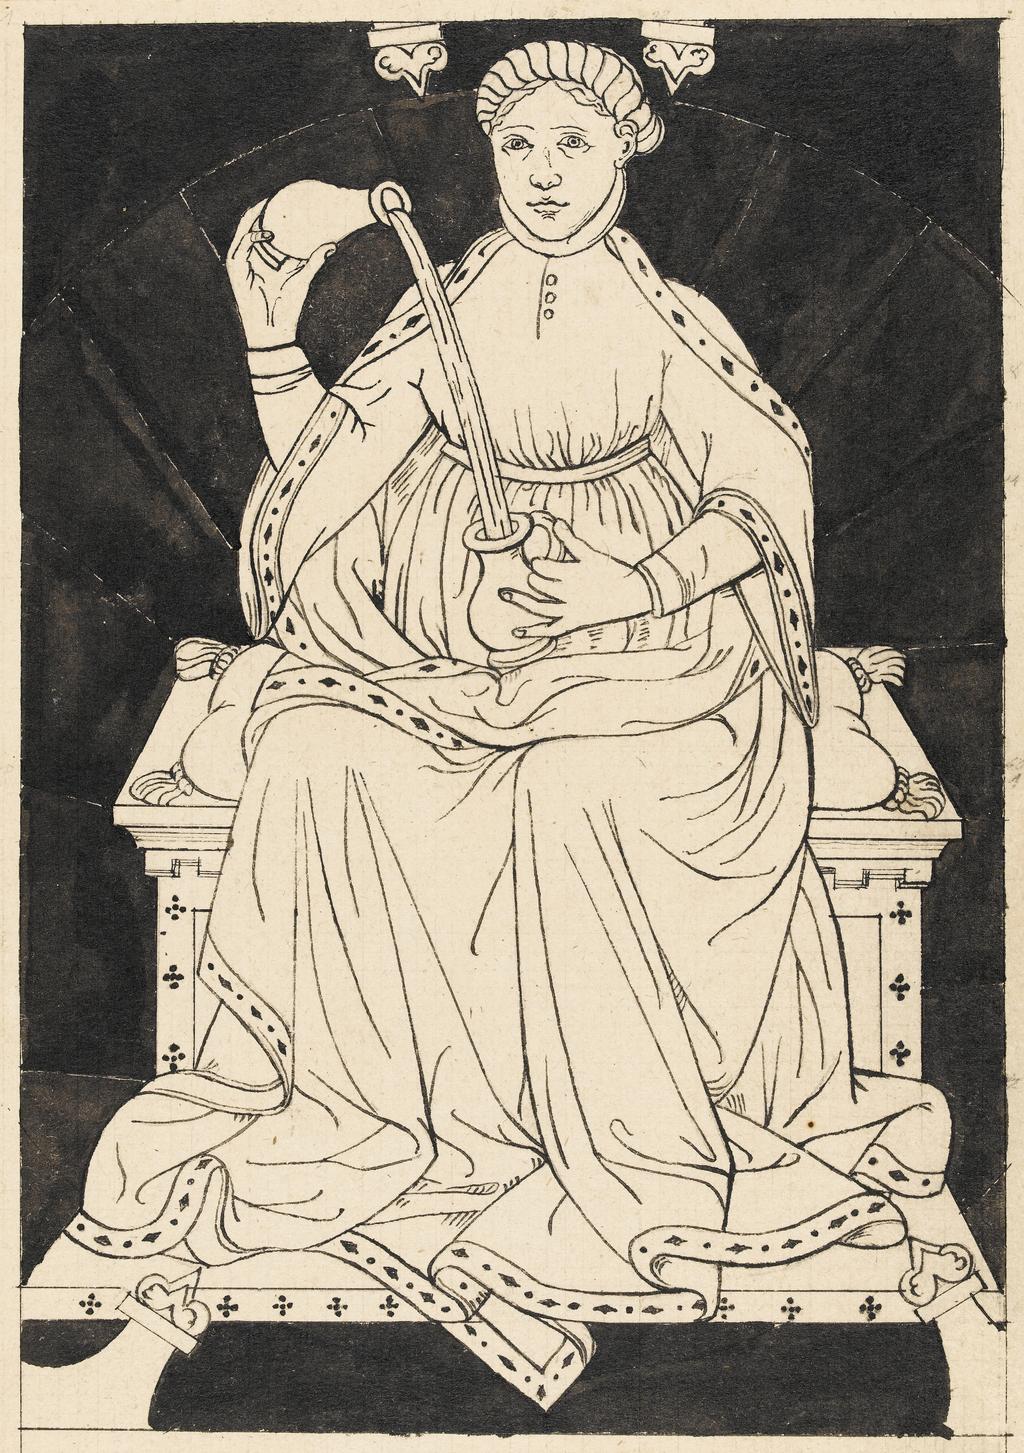 An image of Title/s: Drawing reduced from tracings taken from the inlaid marble pavement of Siena Cathedral during its restoration in the nineteenth centuryTitle/s: Temperance Maker/s: Maccari, Leopoldo (draughtsman) [ULAN info: Italian artist, 1850-1894?]Technique Description: pen and black ink, black wash on lightly squared paper Dimensions: height: 206 mm, width: 146 mm